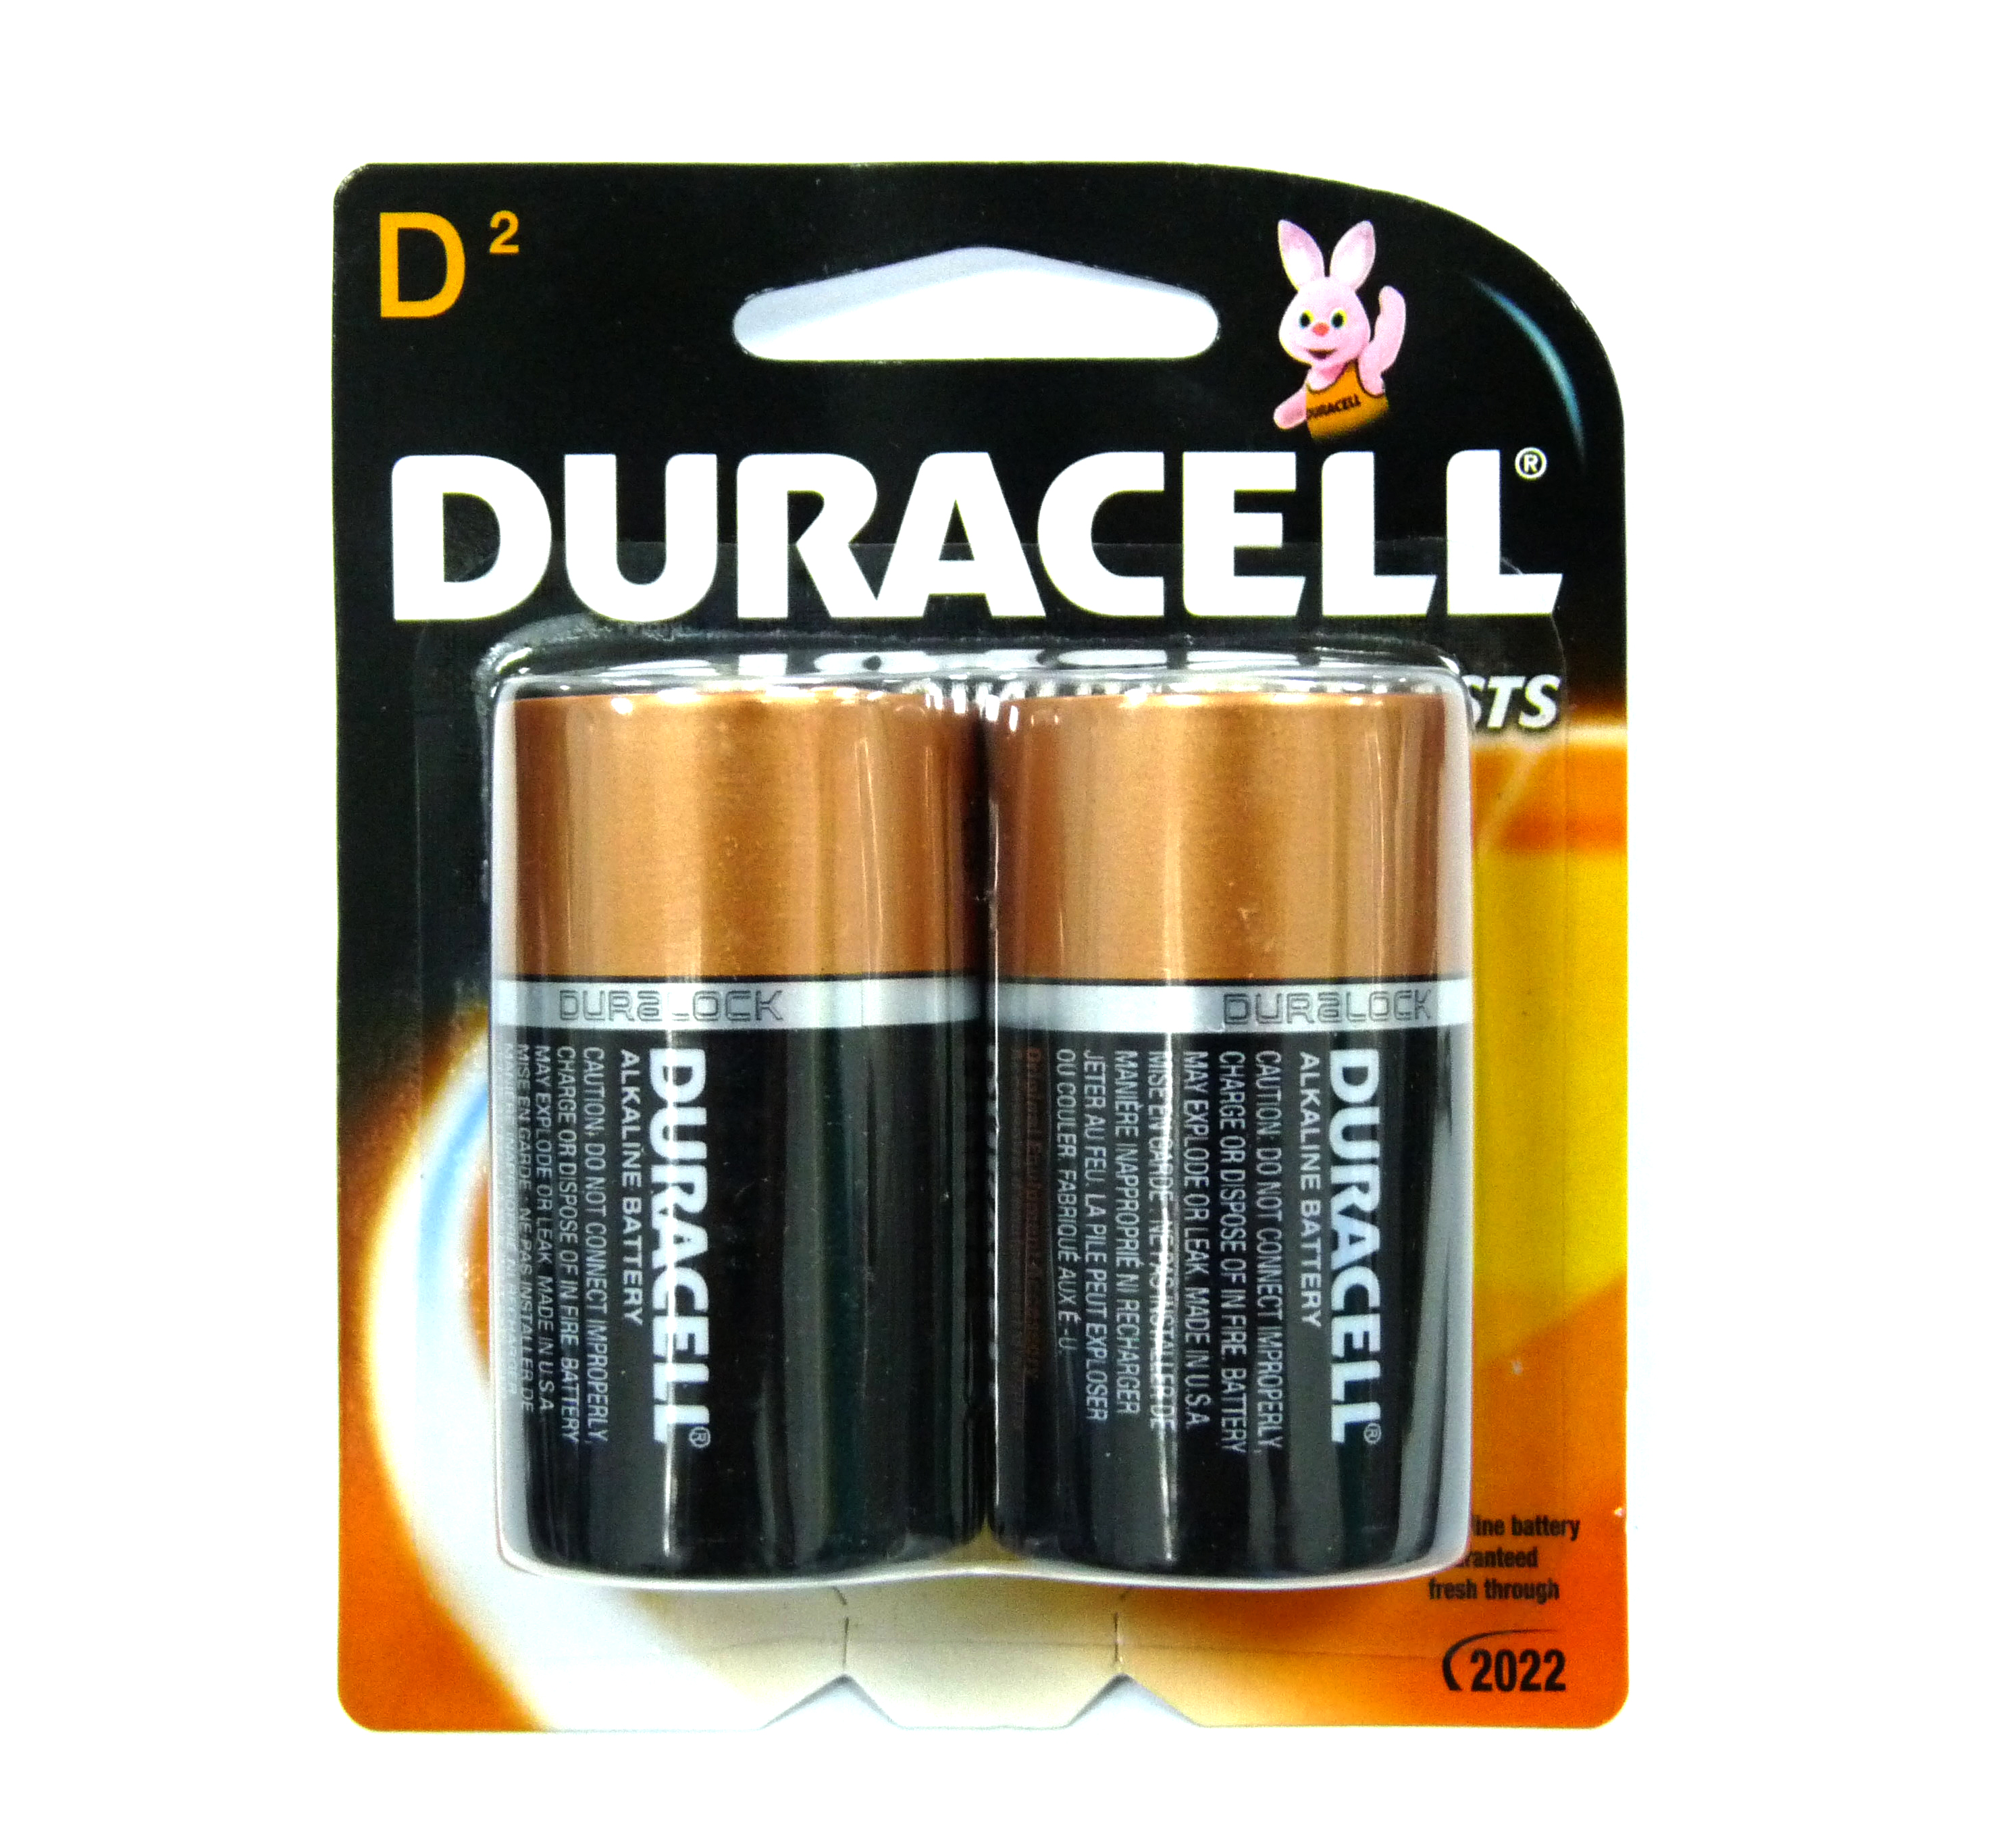 duracell-battery-ducacell-alkaline-dry-cell-aa-aaa-c-d-9v